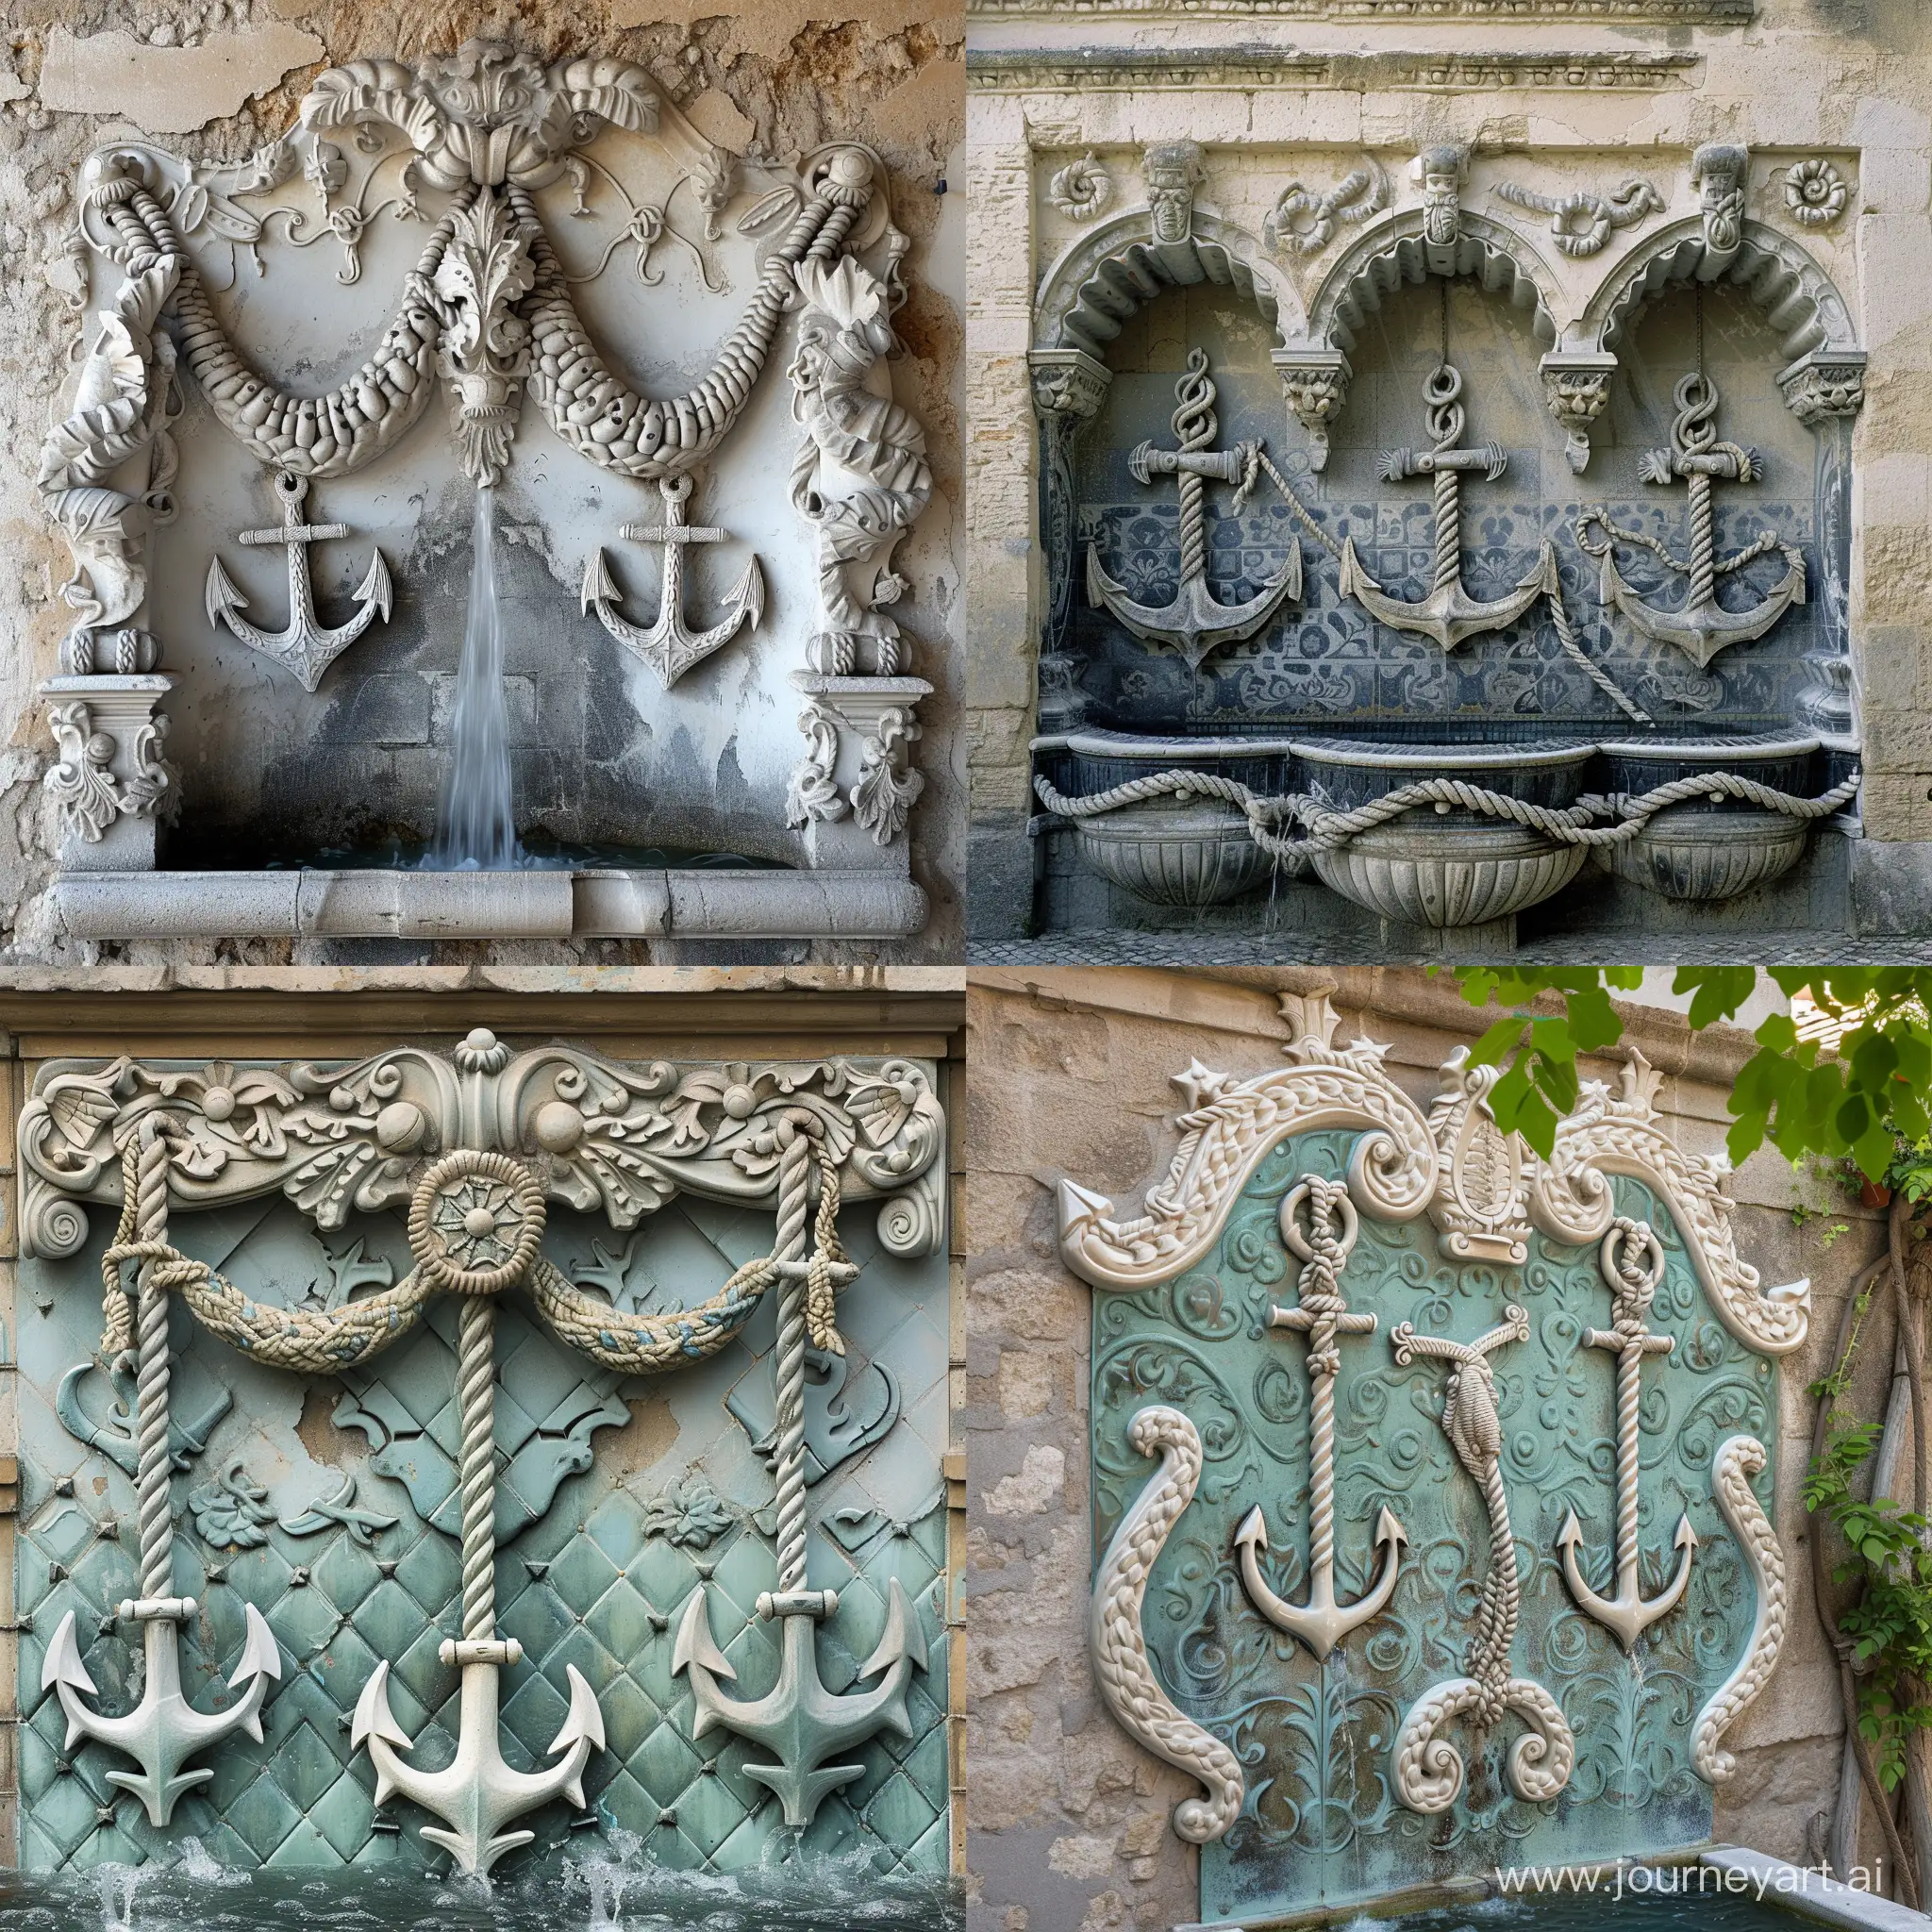 Maritime-Elegance-Sea-Vehicles-Anchored-by-Baroque-Patterned-Wall-Fountain